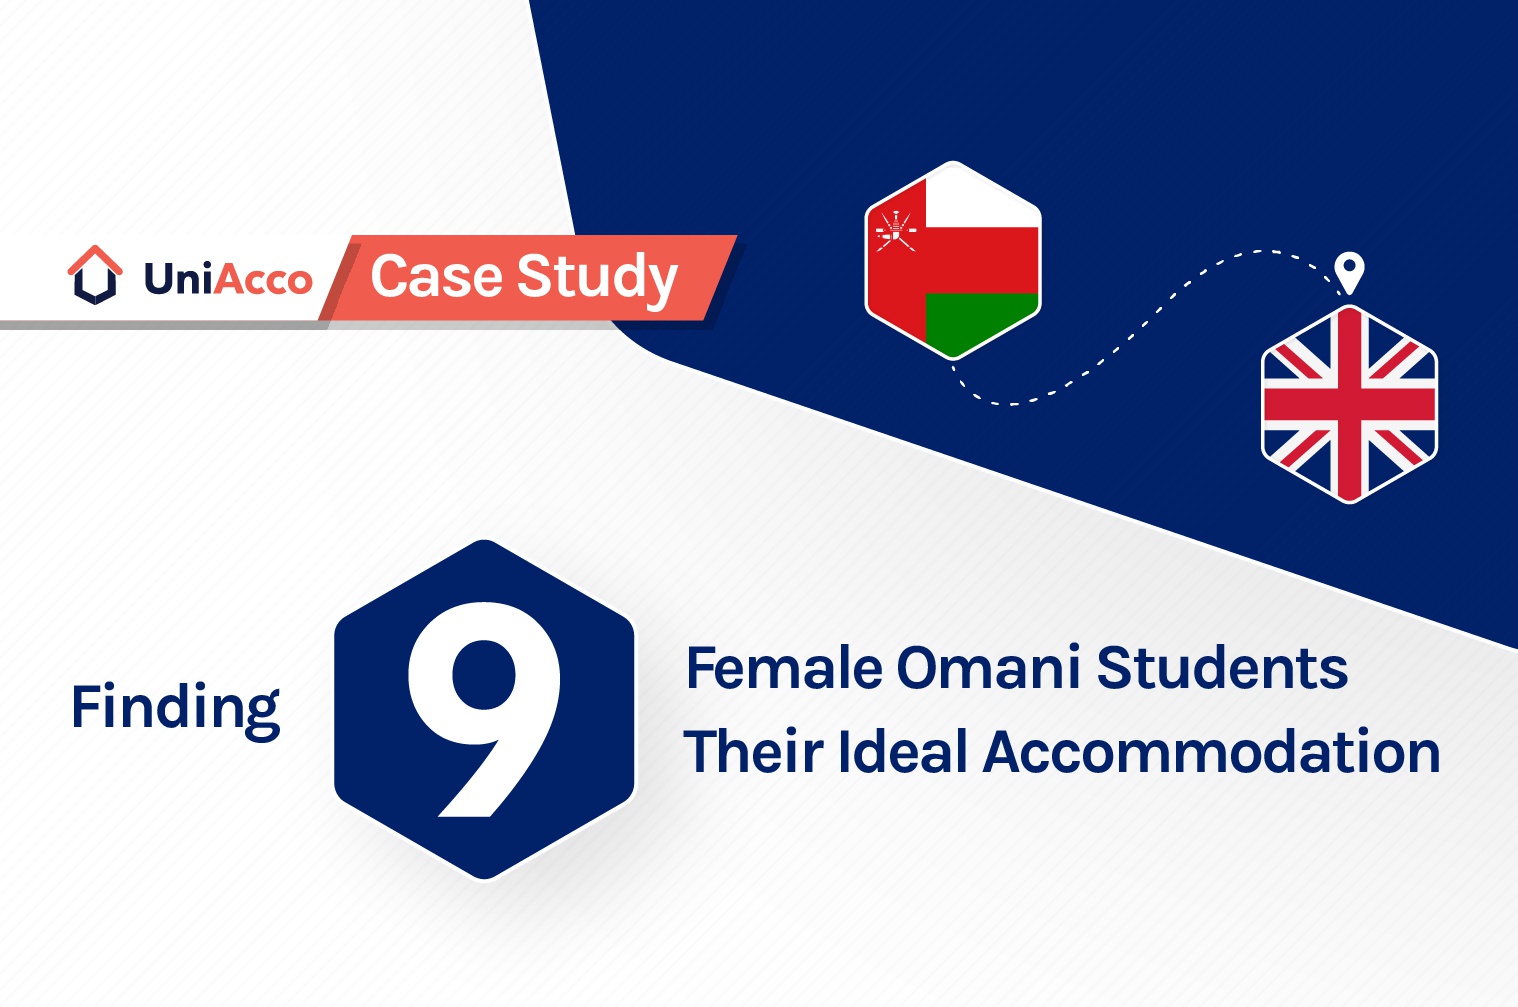 Case Study - Finding 9 Female Omani Students Their Ideal Accommodation